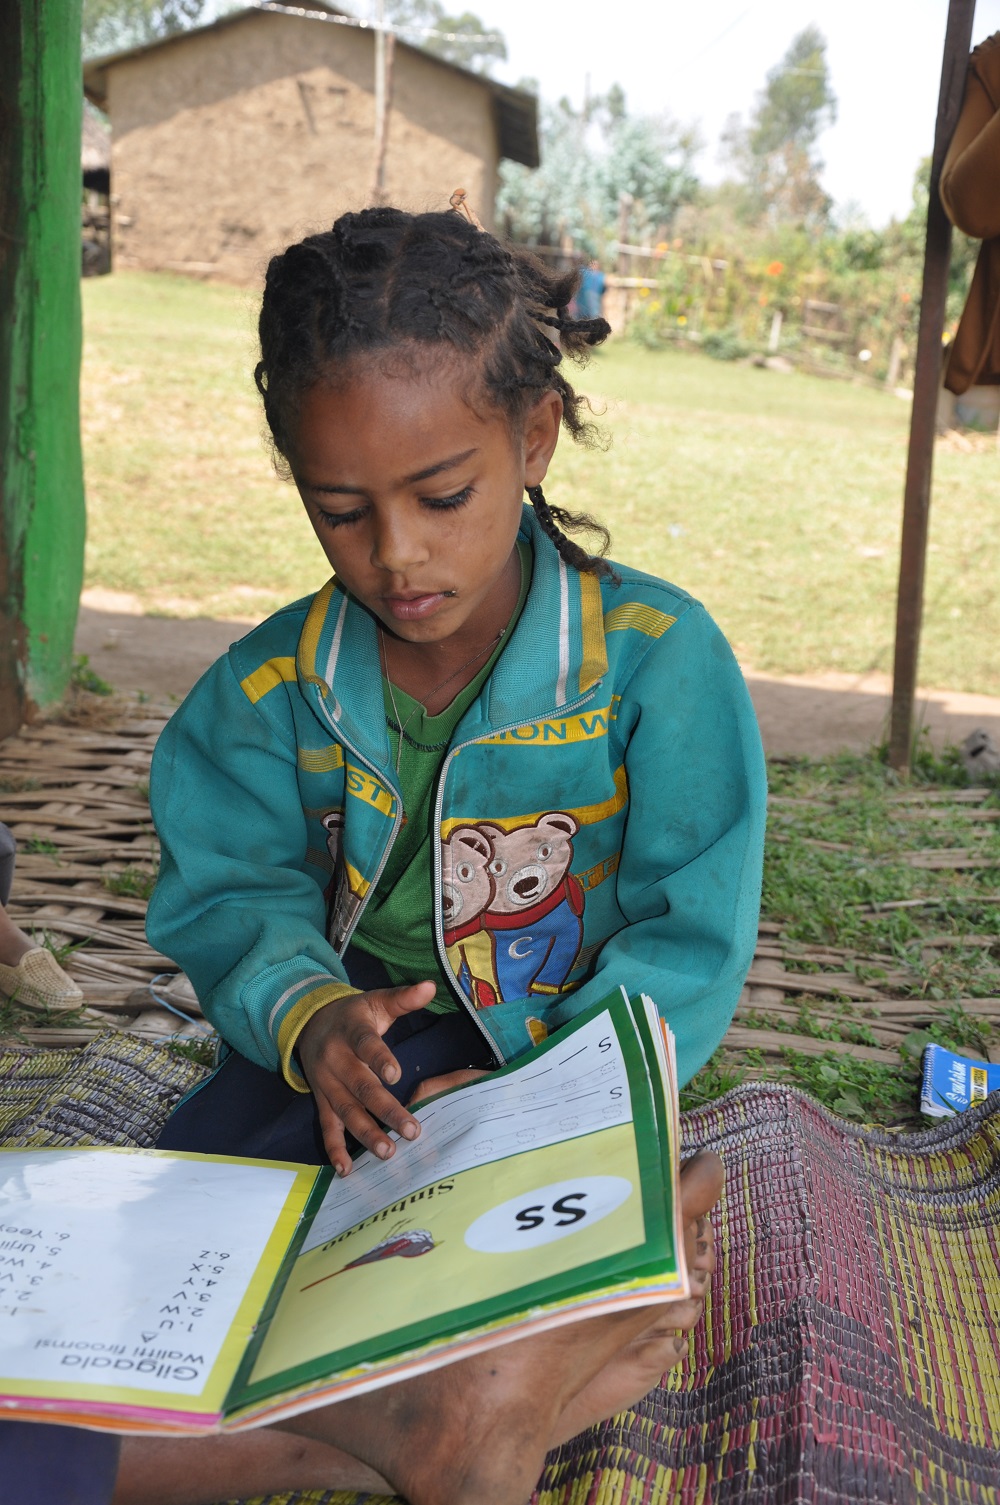 Giduma's 8-year-old sister is learning to read as well